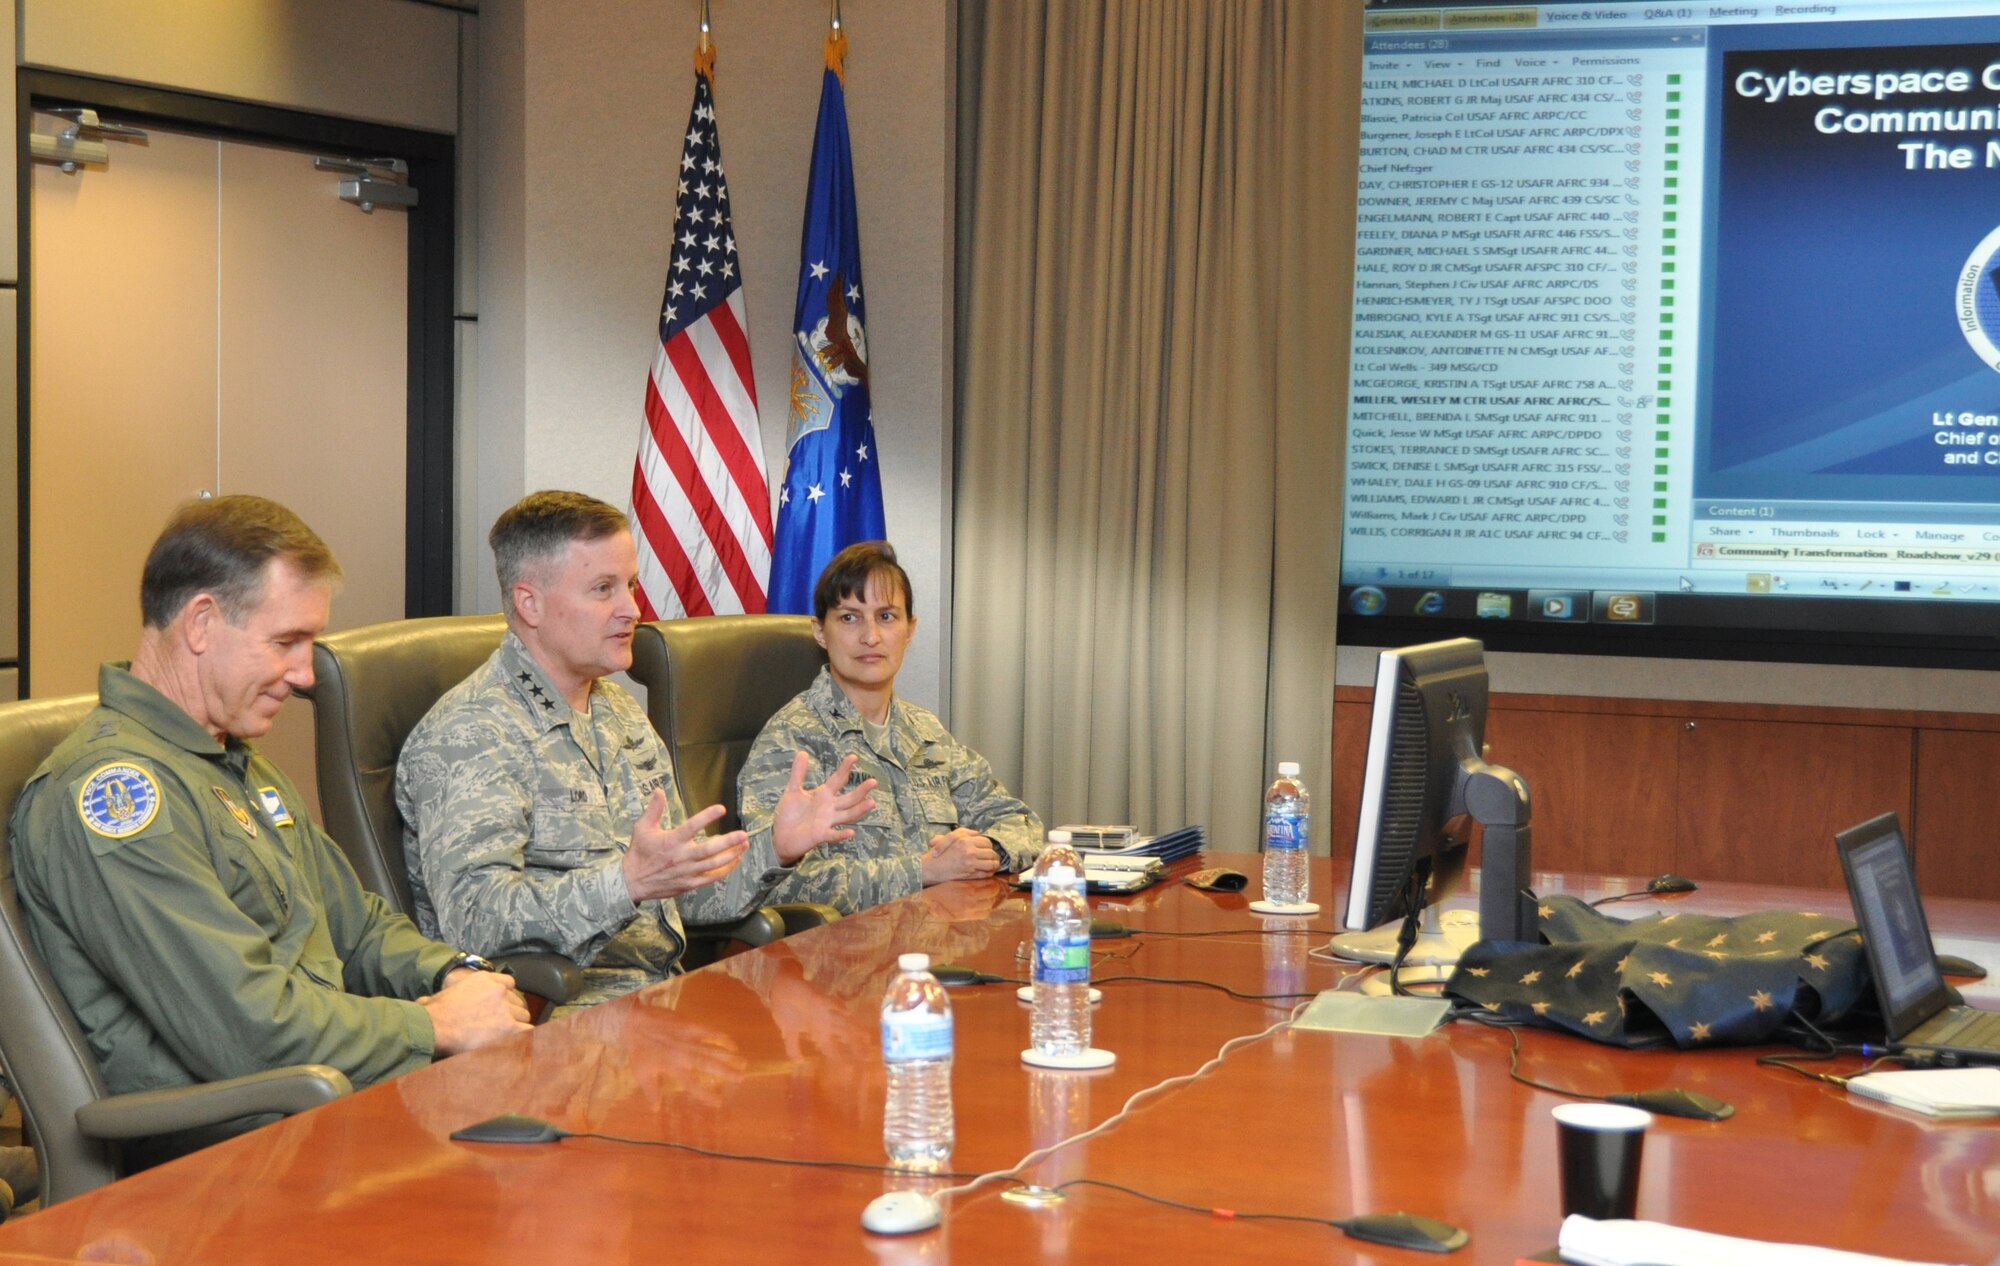 ROBINS AIR FORCE BASE, Ga. -- Lt. Gen. William T. Lord, Air Force chief of Warfighting Integration and Chief Information Officer, (center) conducts a video teleconference with Air Force Reserve Command cyber warriors. Flanking Lord are, left, Maj. Gen. Craig Neil Gourley, Air Force Reserve Command vice commander and Col. Kimberly Ramos, AFRC/A6 director. The teleconference with field communications units was part of Lord’s visit with AFRC and the 689th Combat Communications Wing here, Jan. 6-7, 2012. (U.S. Air Force photo/Capt. Polly Orcutt)